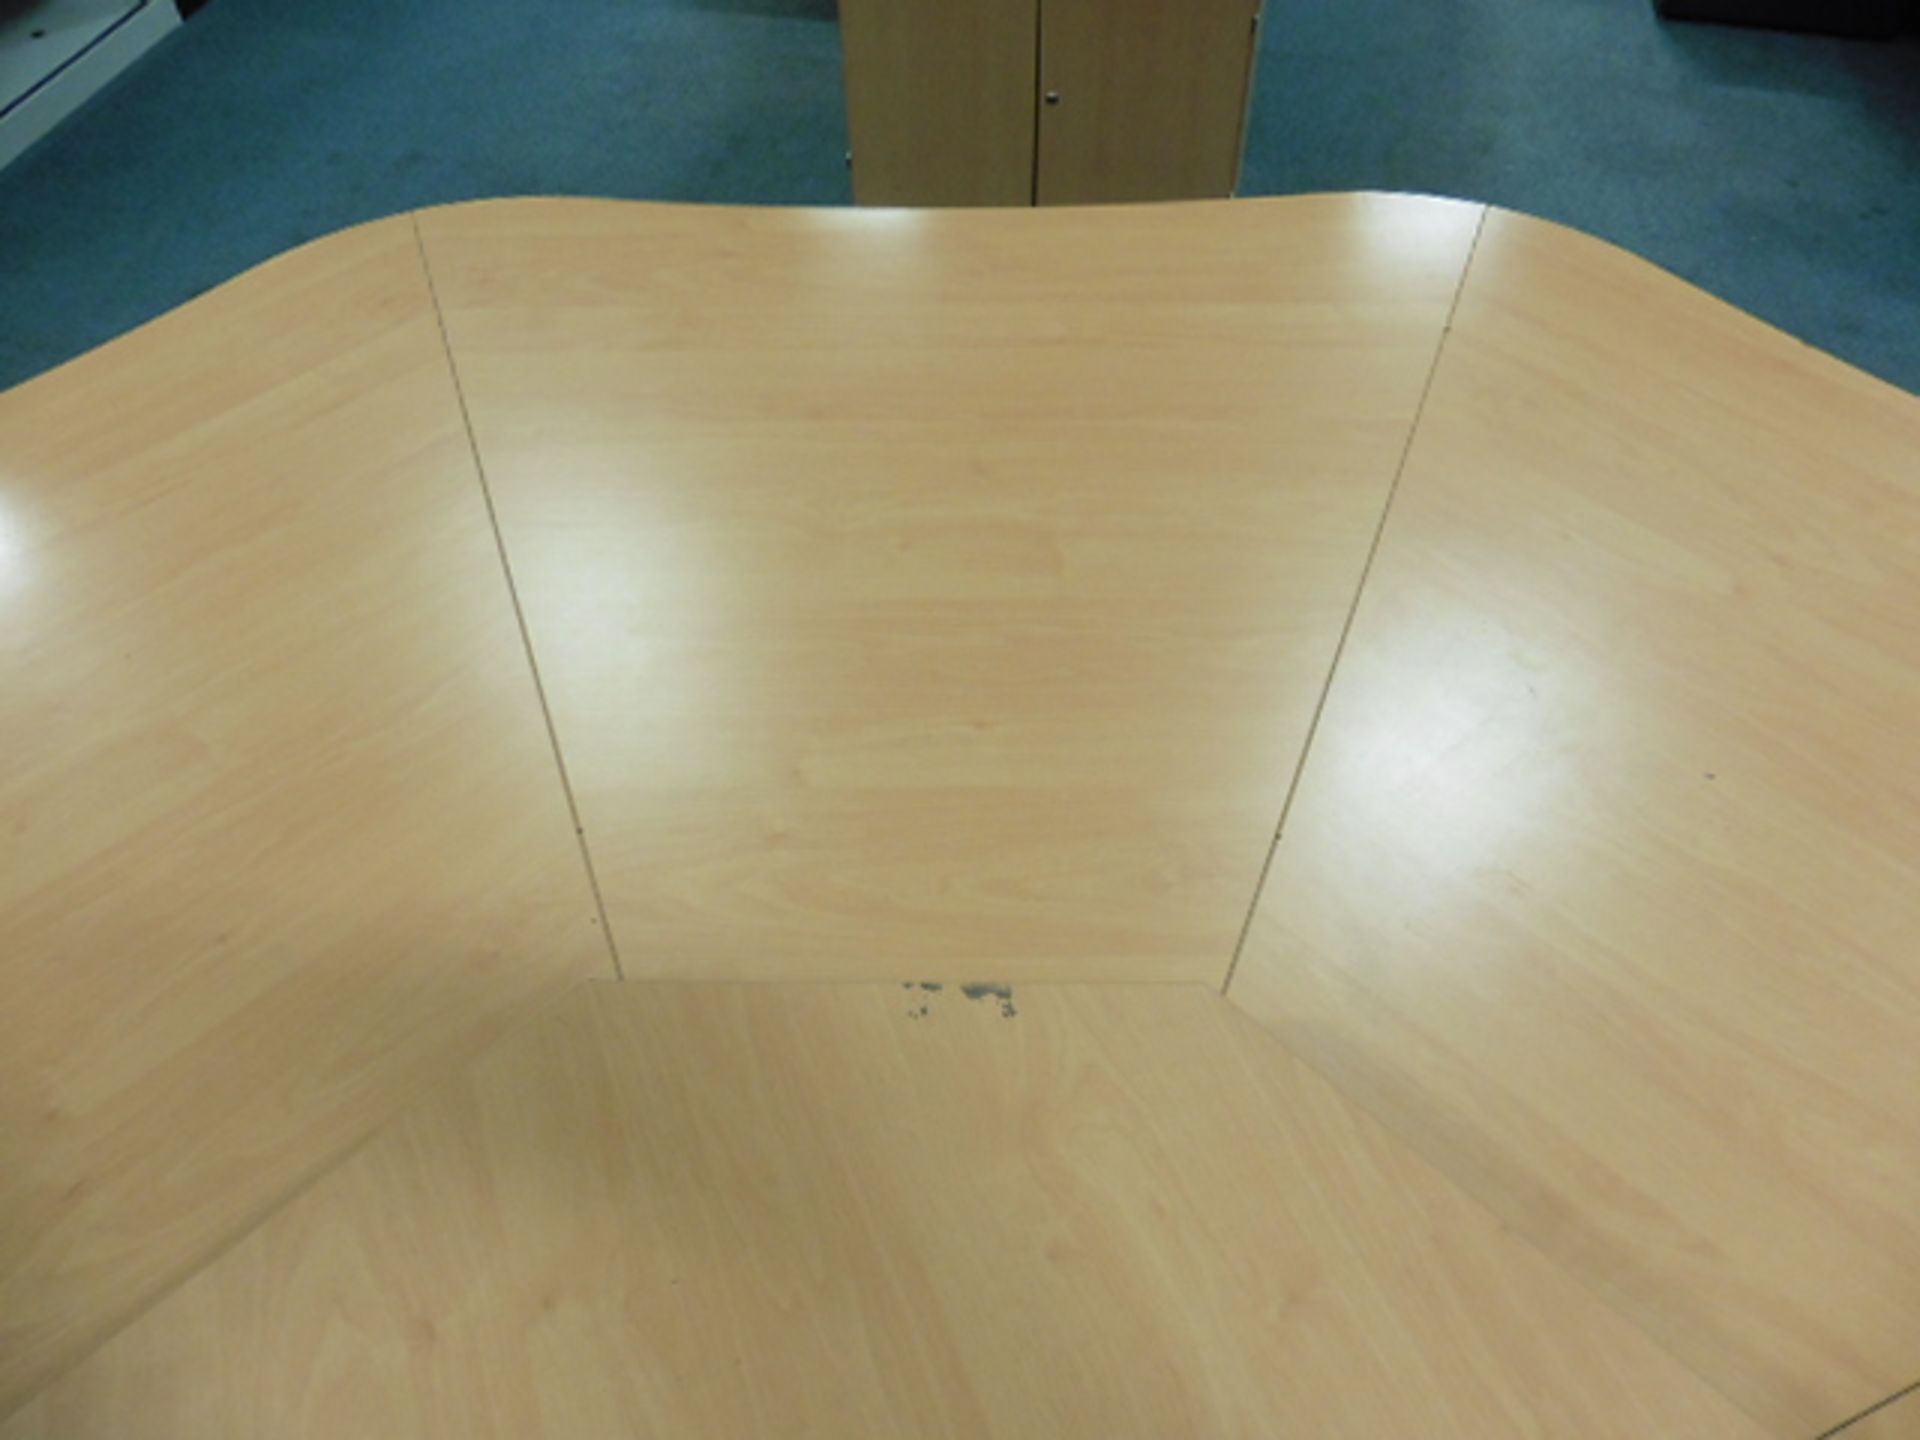 Call centre 10 station modular desk pod finished in beech and grey, comes with 5 free standing - Image 6 of 6